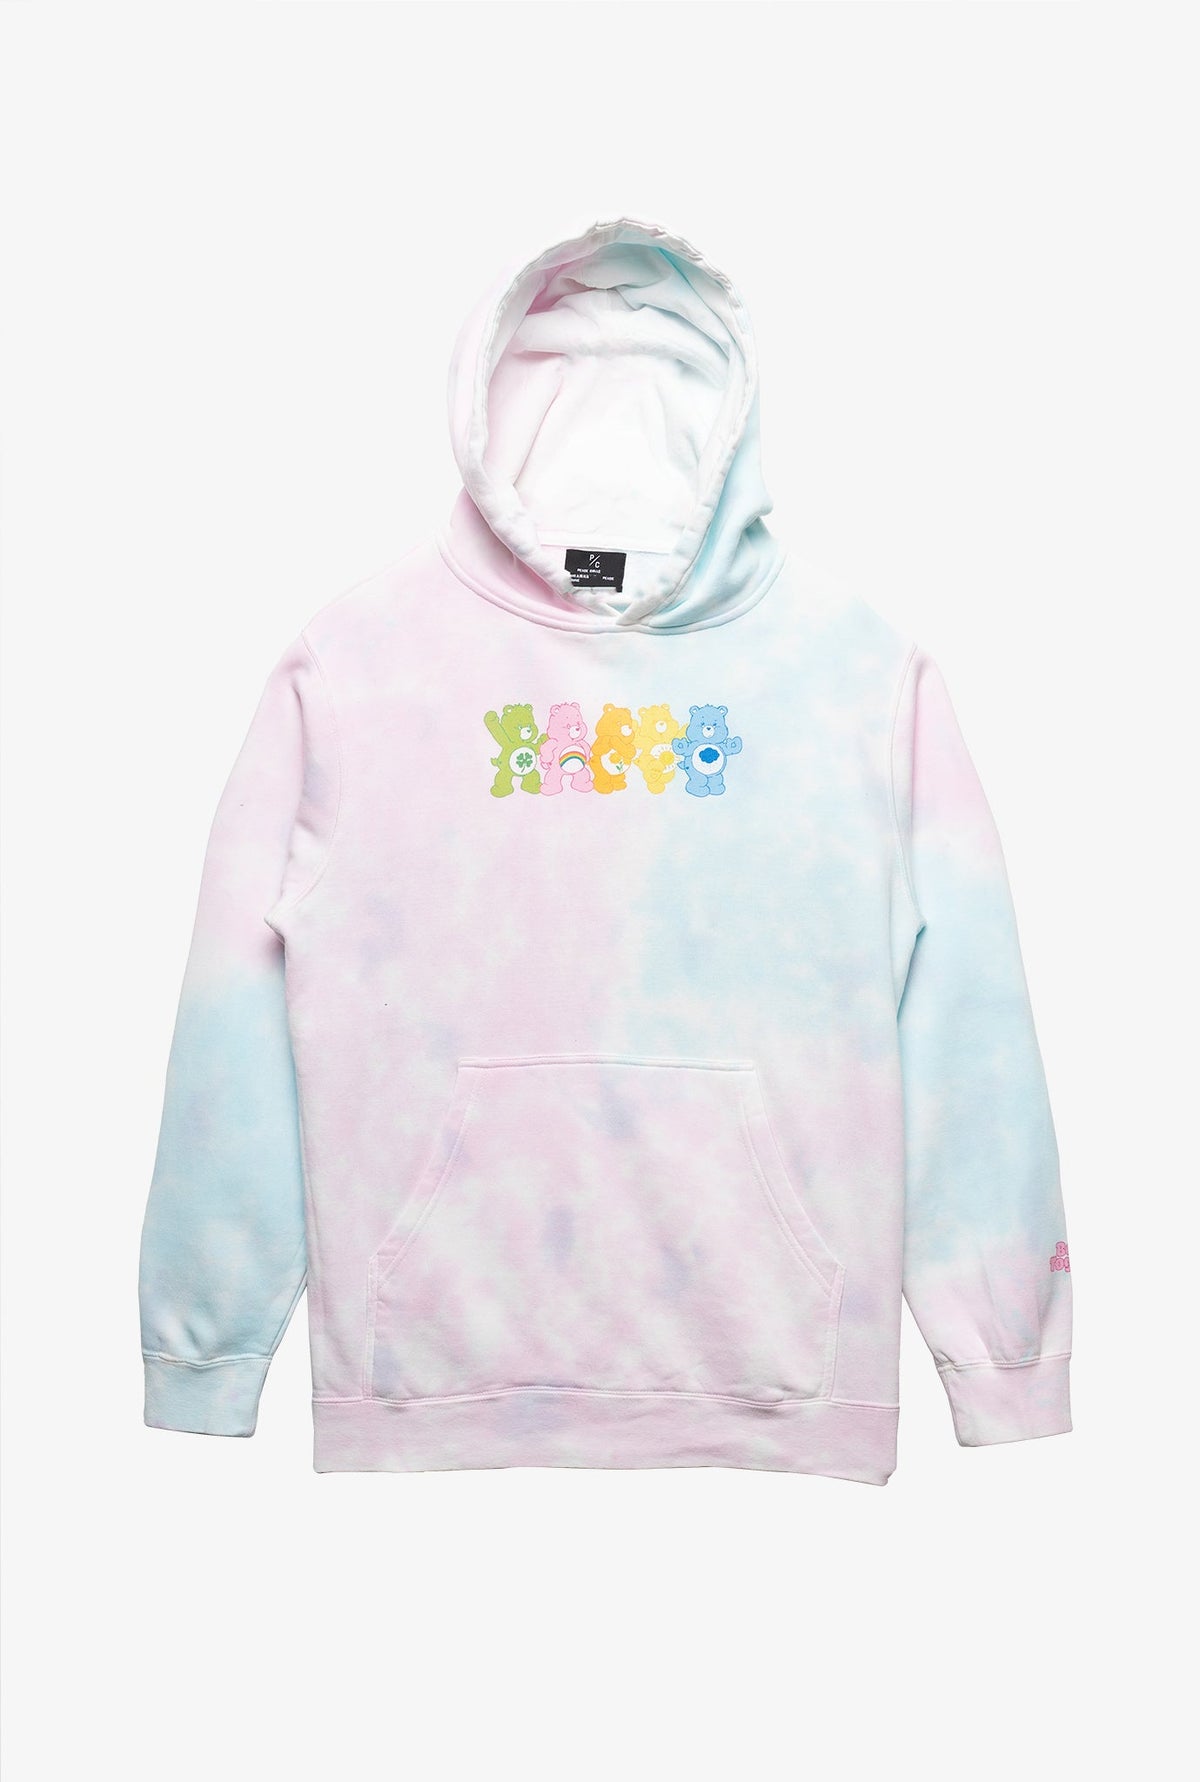 Better Together Tie Dye Hoodie - Cotton Candy